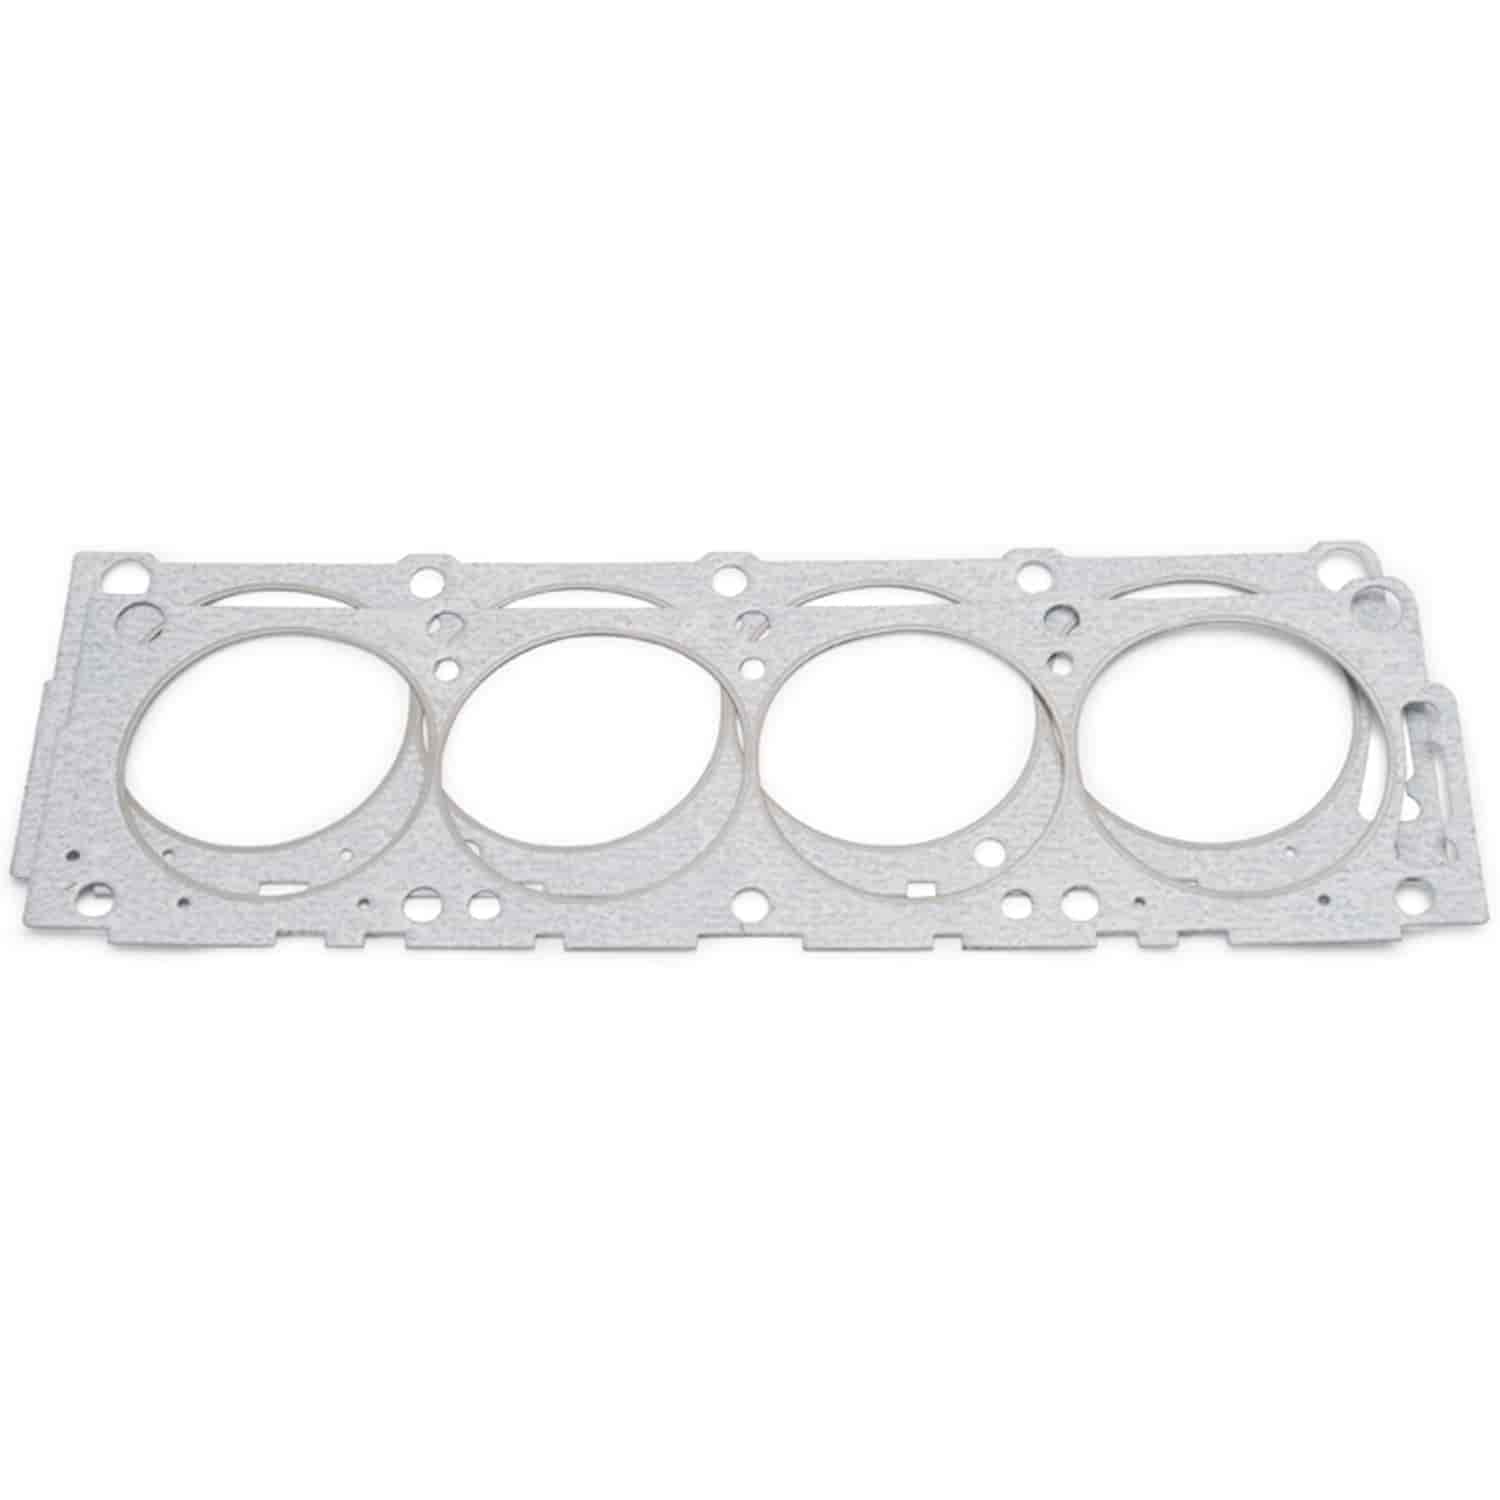 Head Gaskets for 1958-1976 Ford FE 332-428